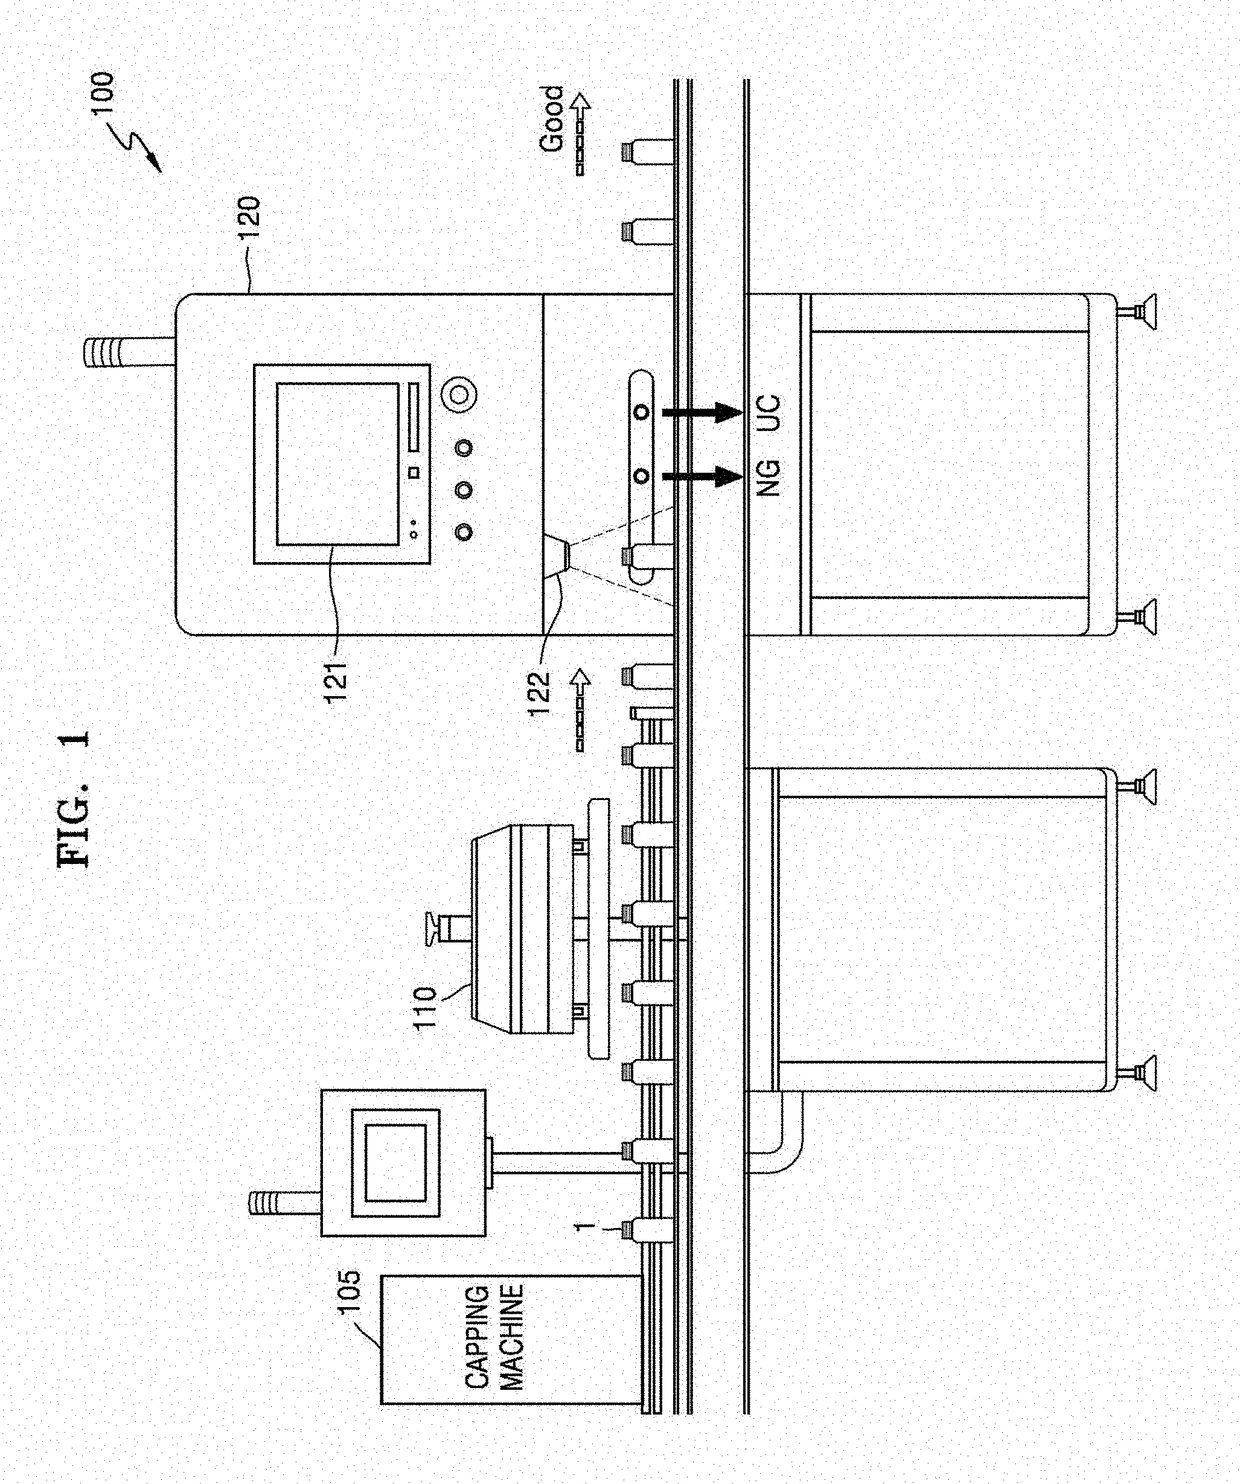 Inspection method and apparatus